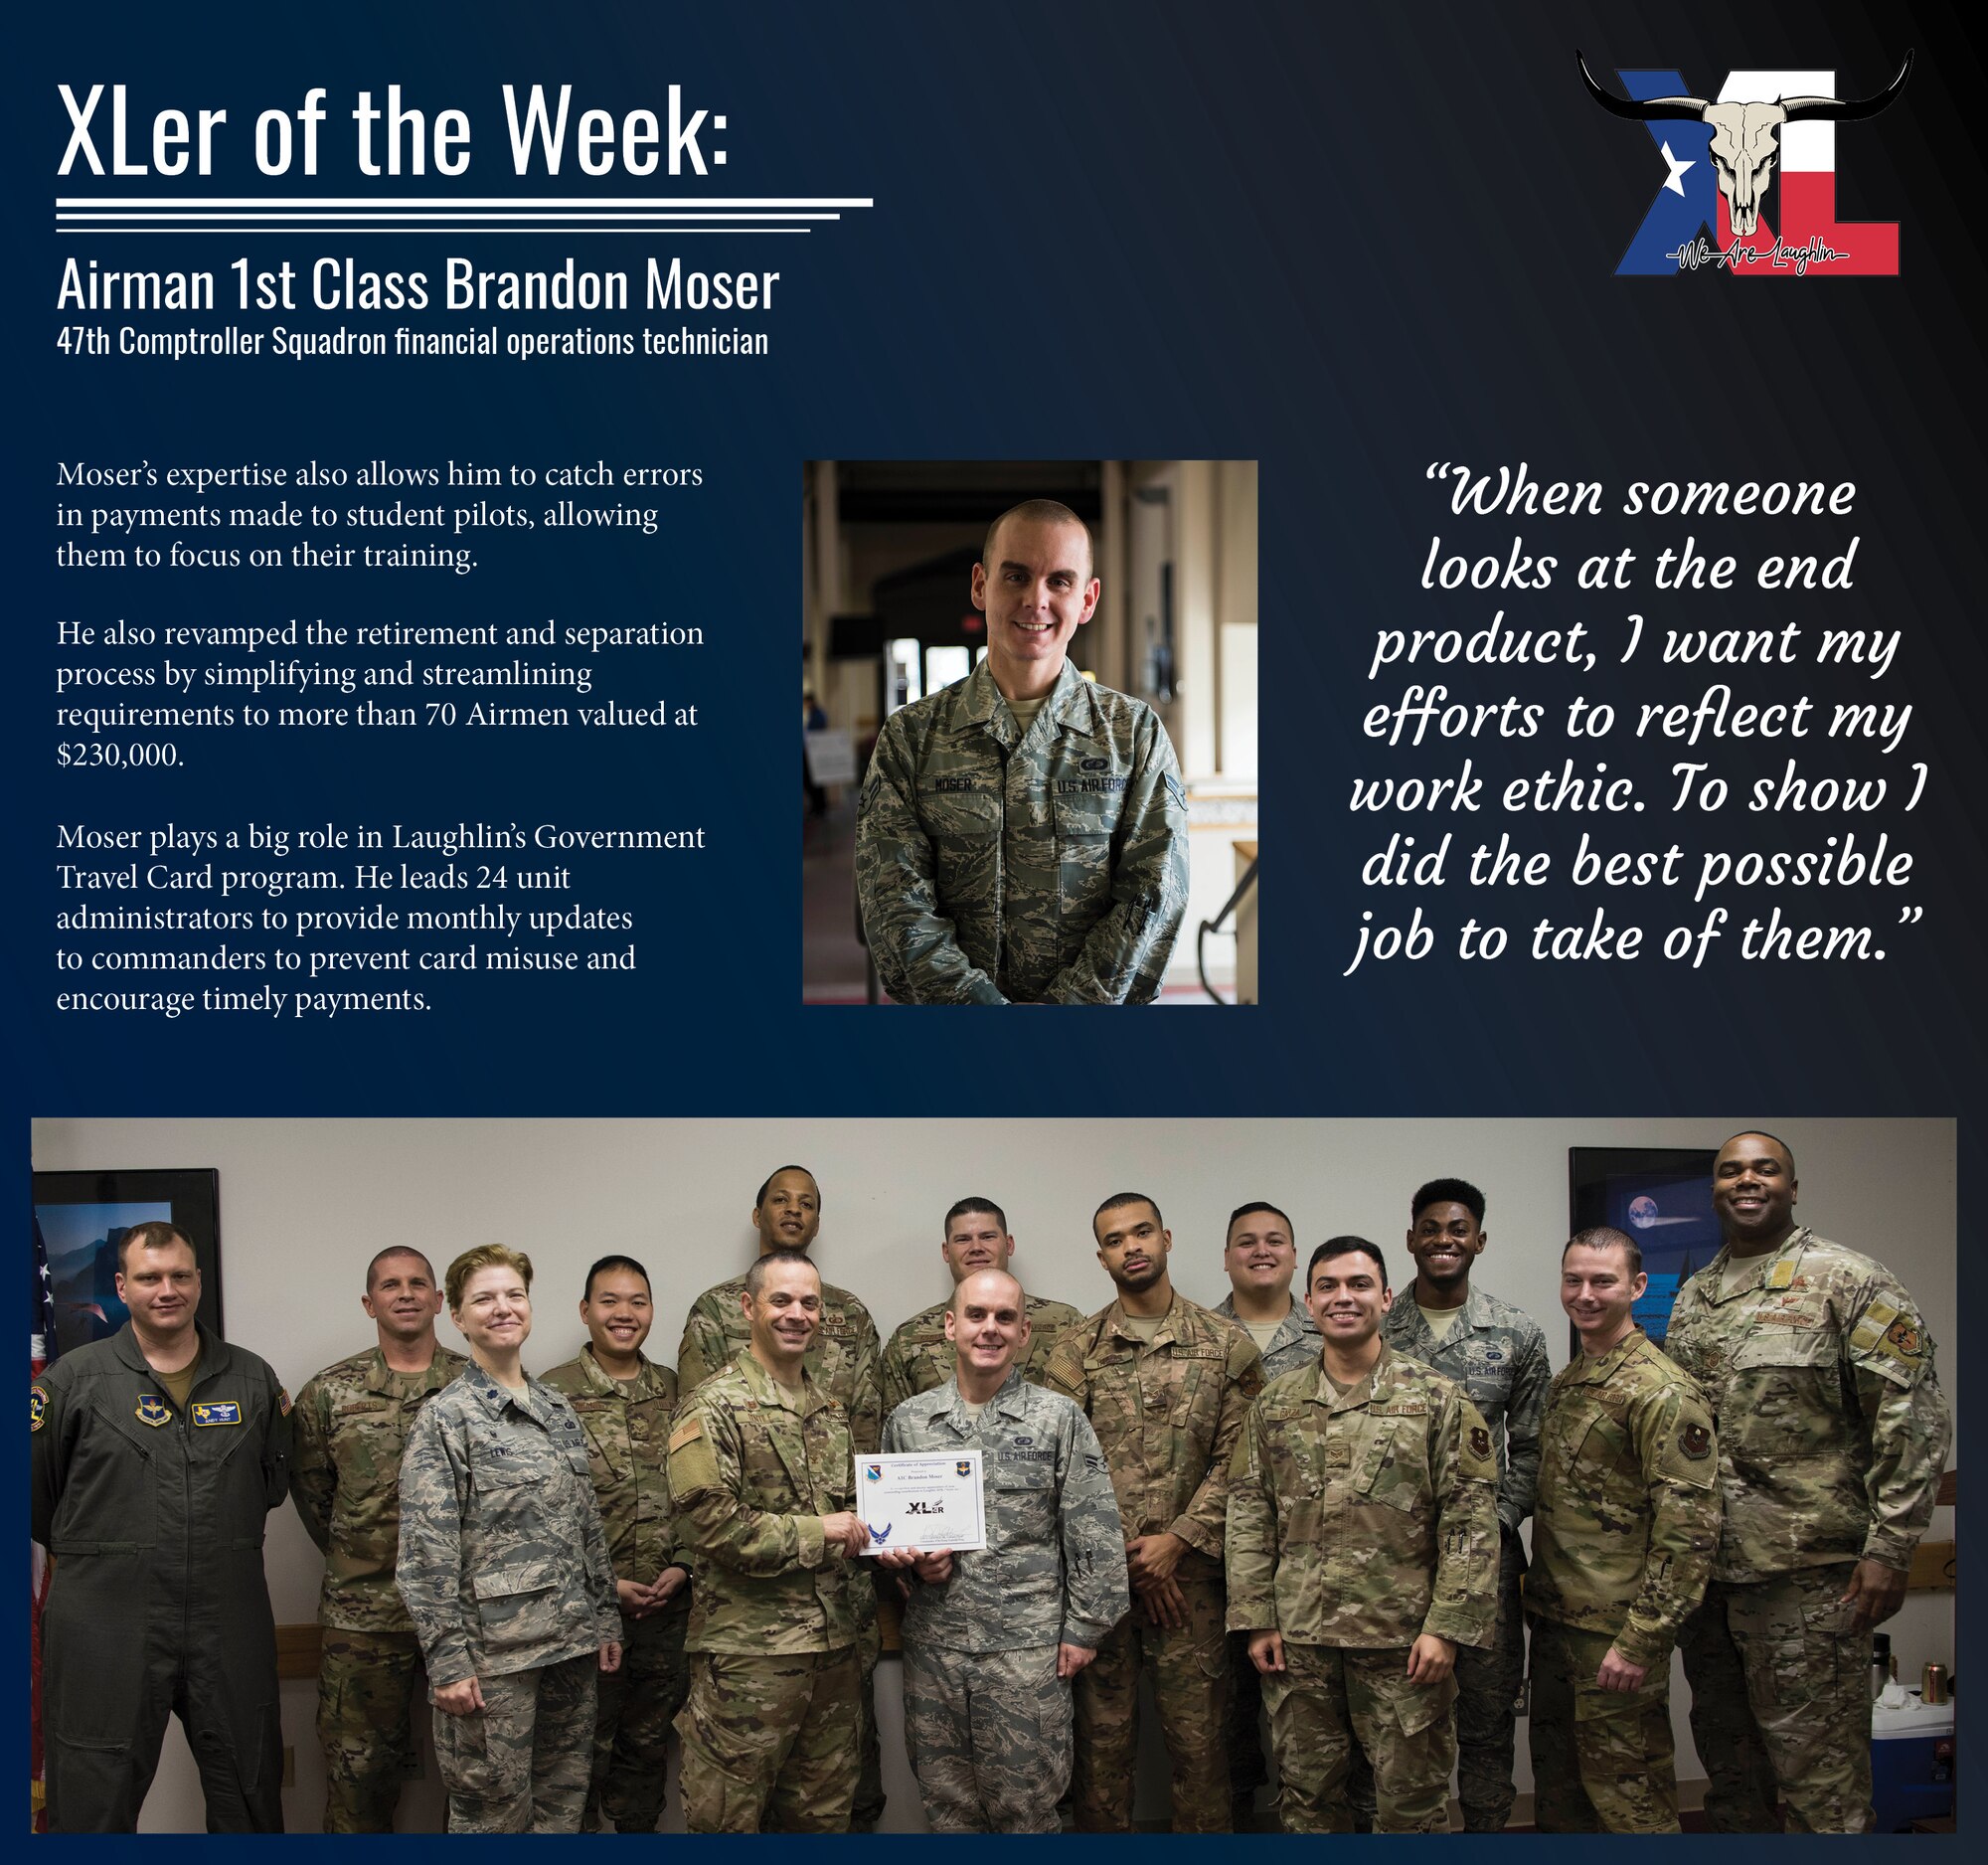 Airman 1st Class Brandon Moser, a 47th Comptroller Squadron financial operations technician, was chosen by wing leadership to be the “XLer of the Week” of Jan. 13, 2019 at Laughlin Air Force Base, Texas. The “XLer” award, presented by Col. Lee Gentile, 47th Flying Training Wing commander, and Chief Master Sgt. Robert Zackery III, 47th FTW command chief master sergeant, is given to those who consistently make outstanding contributions to their unit and the Laughlin mission. (U.S. Air Force Graphic by Senior Airman Marco A. Gomez)